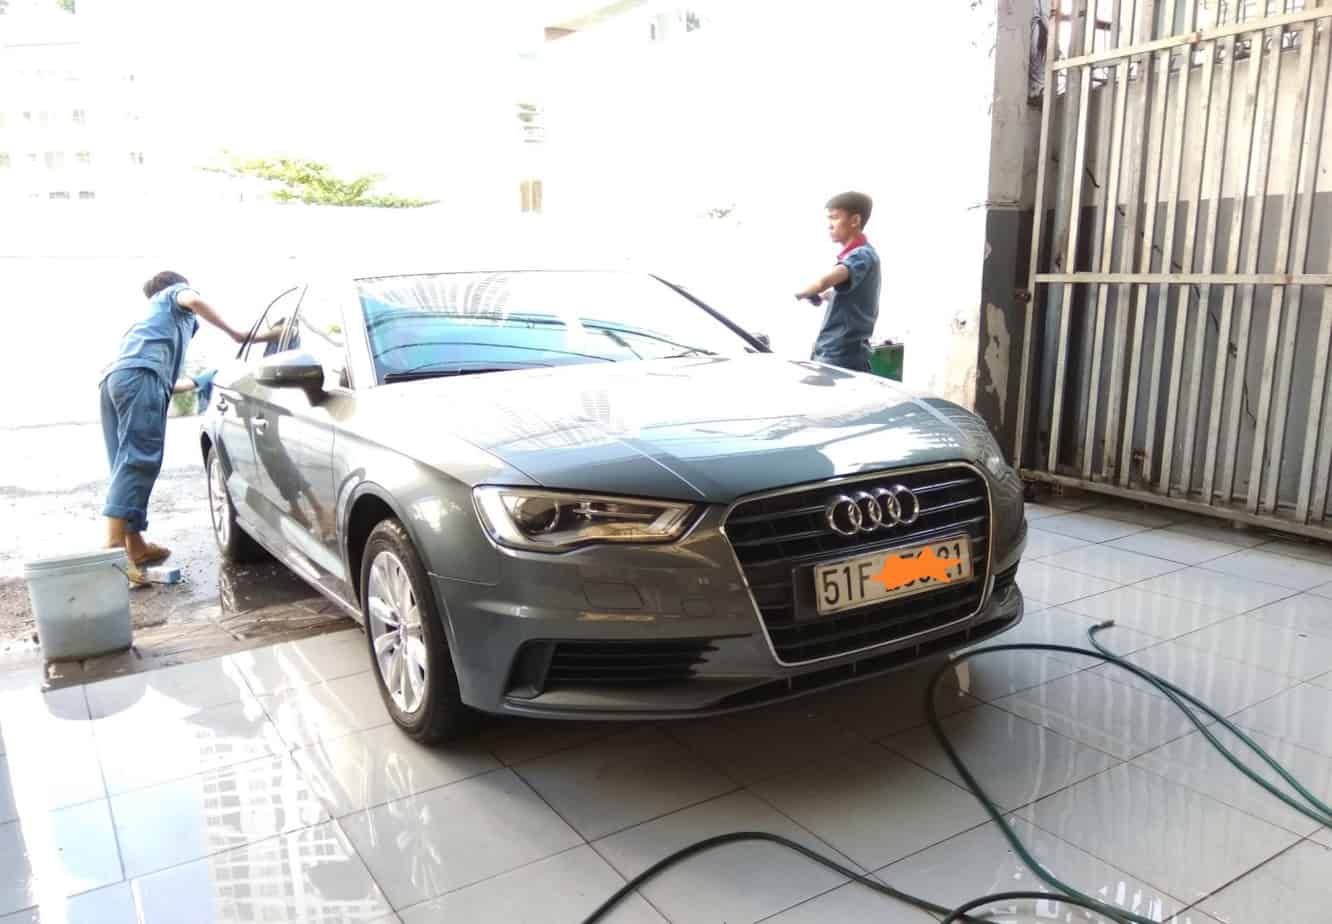 Wash the car immediately after the car has been wet